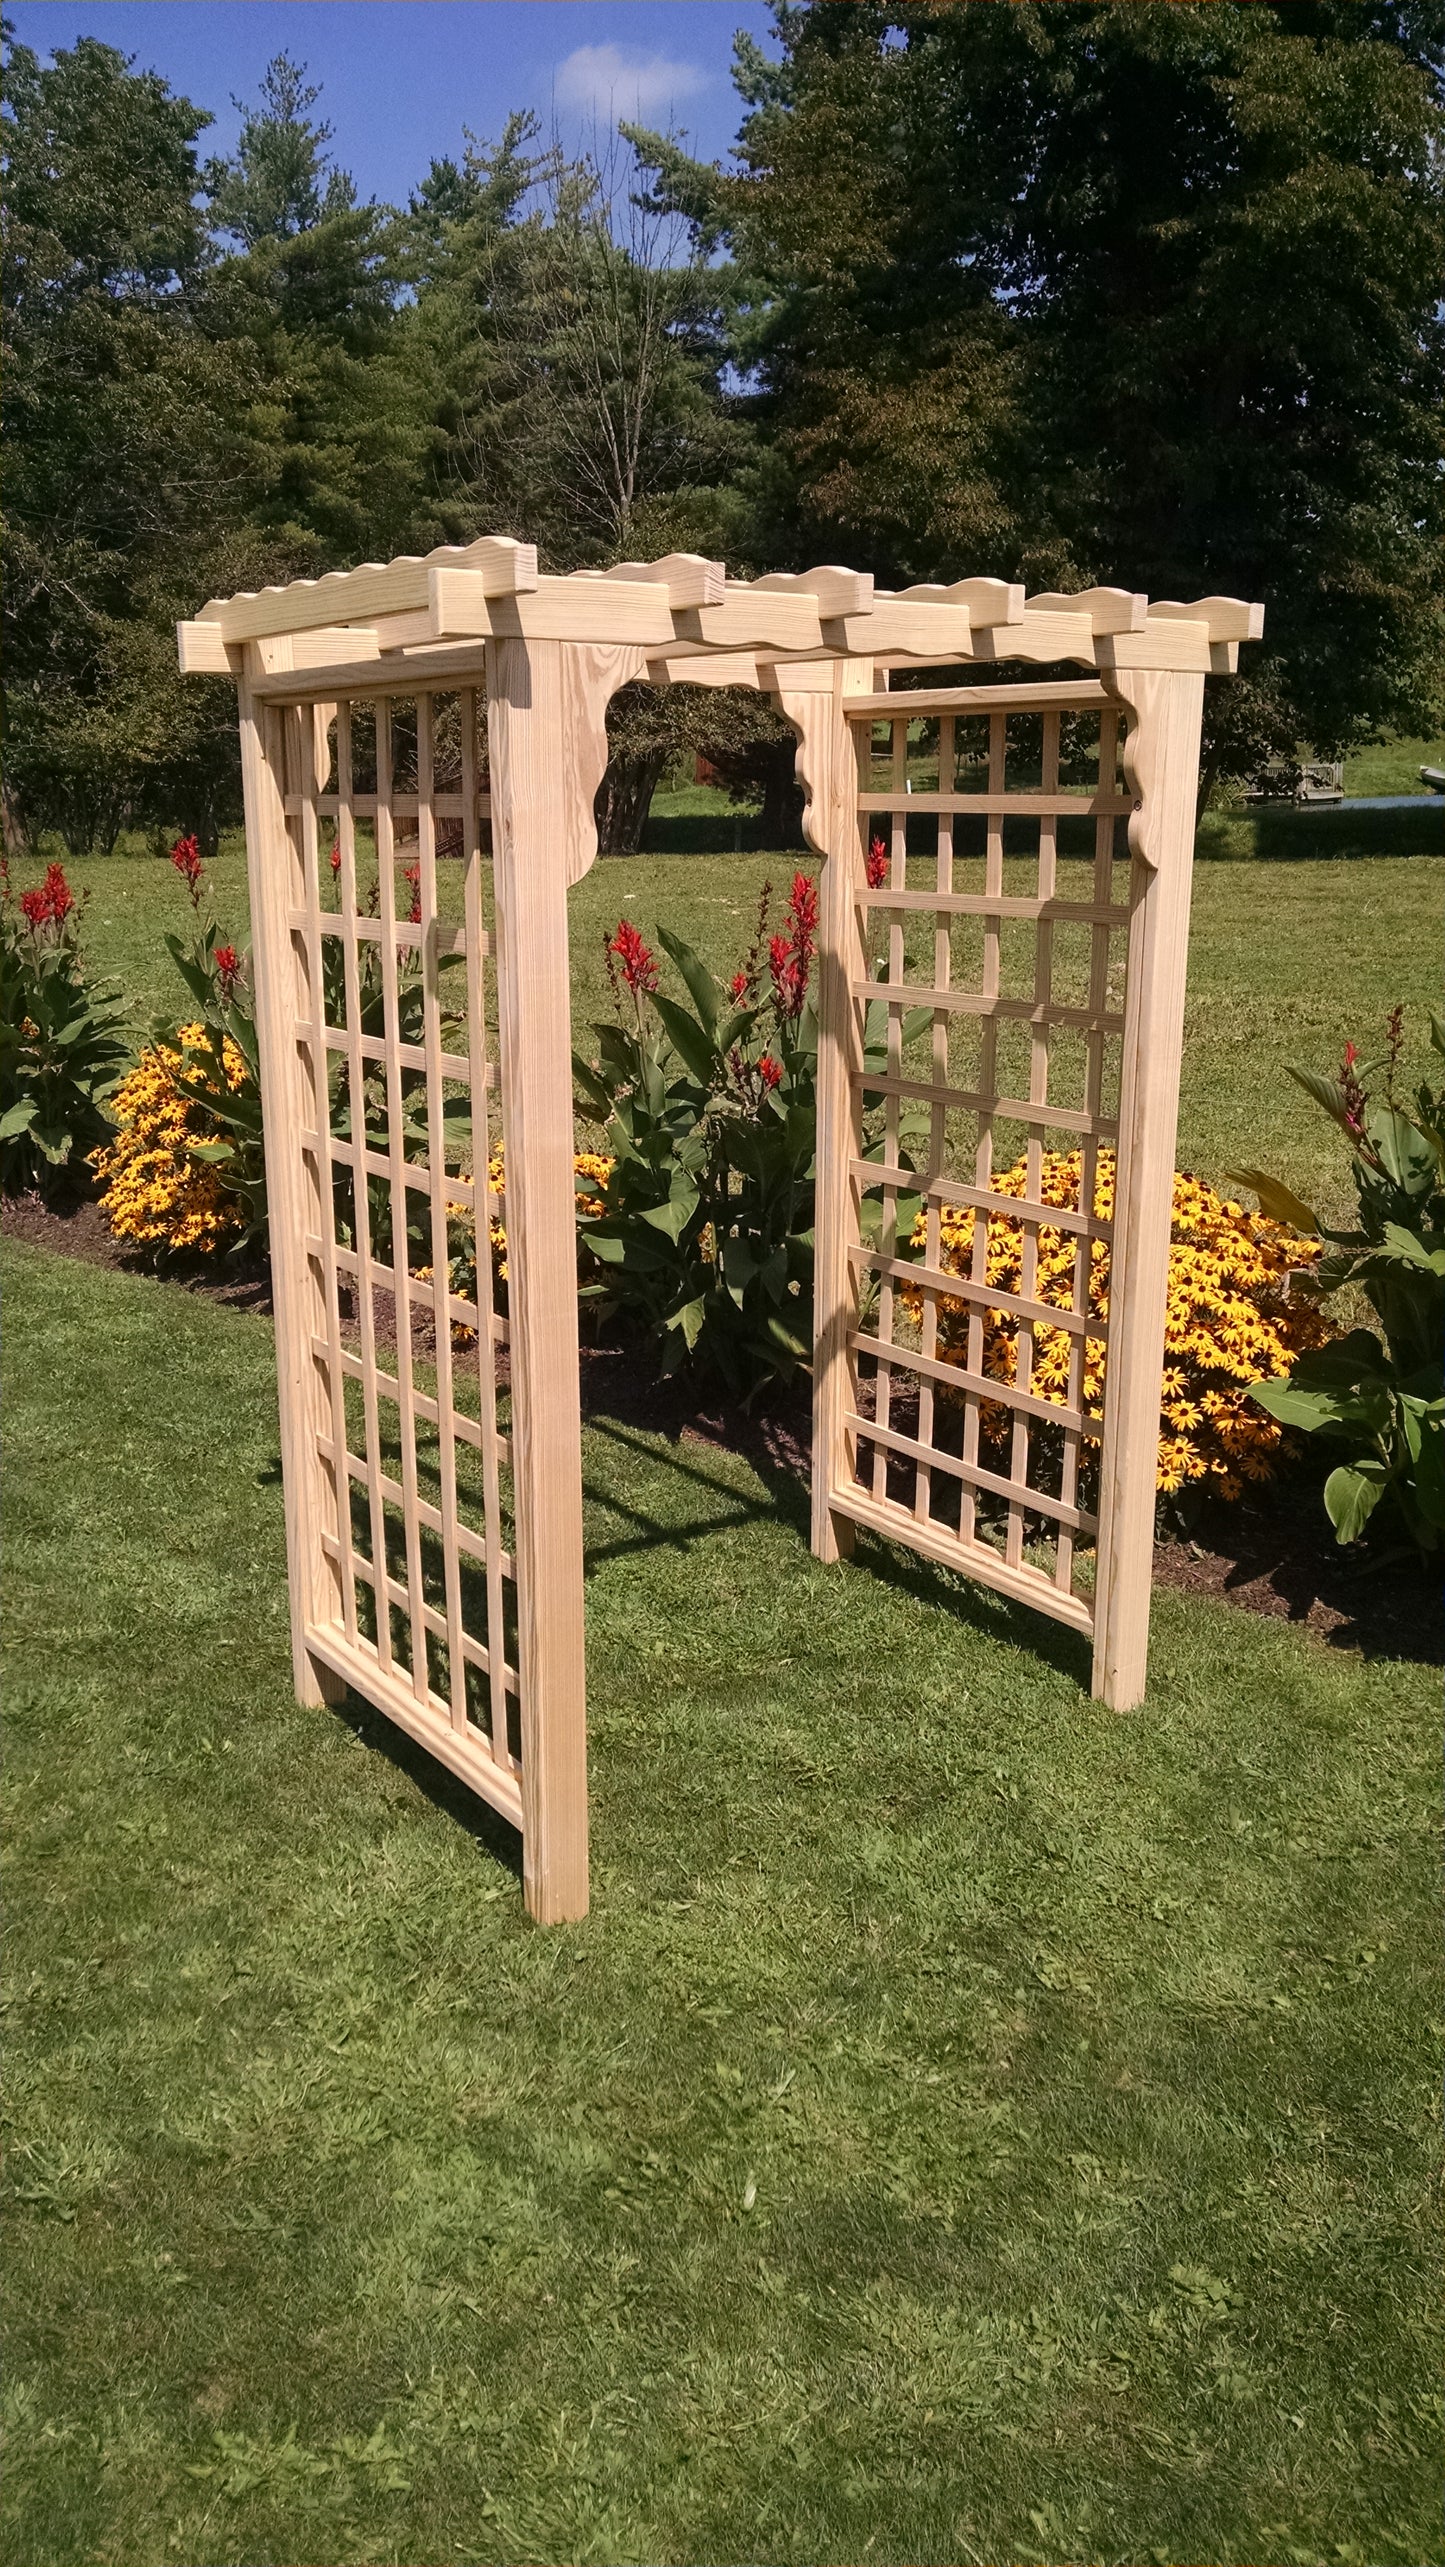 A&L FURNITURE CO. 4' Lexington Pressure Treated Pine Arbor - LEAD TIME TO SHIP 10 BUSINESS DAYS